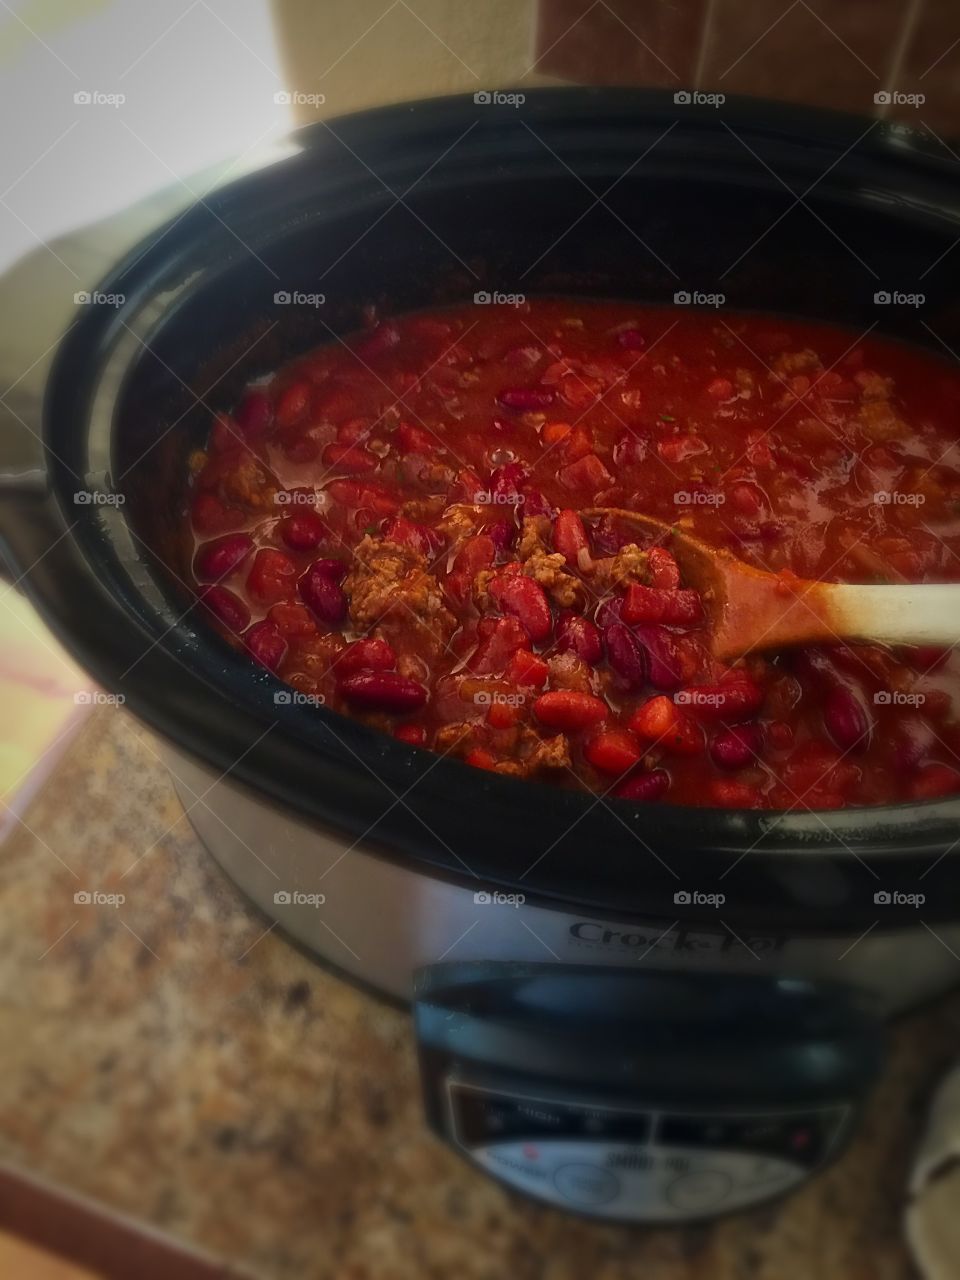 Chili for when it's chilly . Home made chili from scratch. Favorite part of fall is fall food 